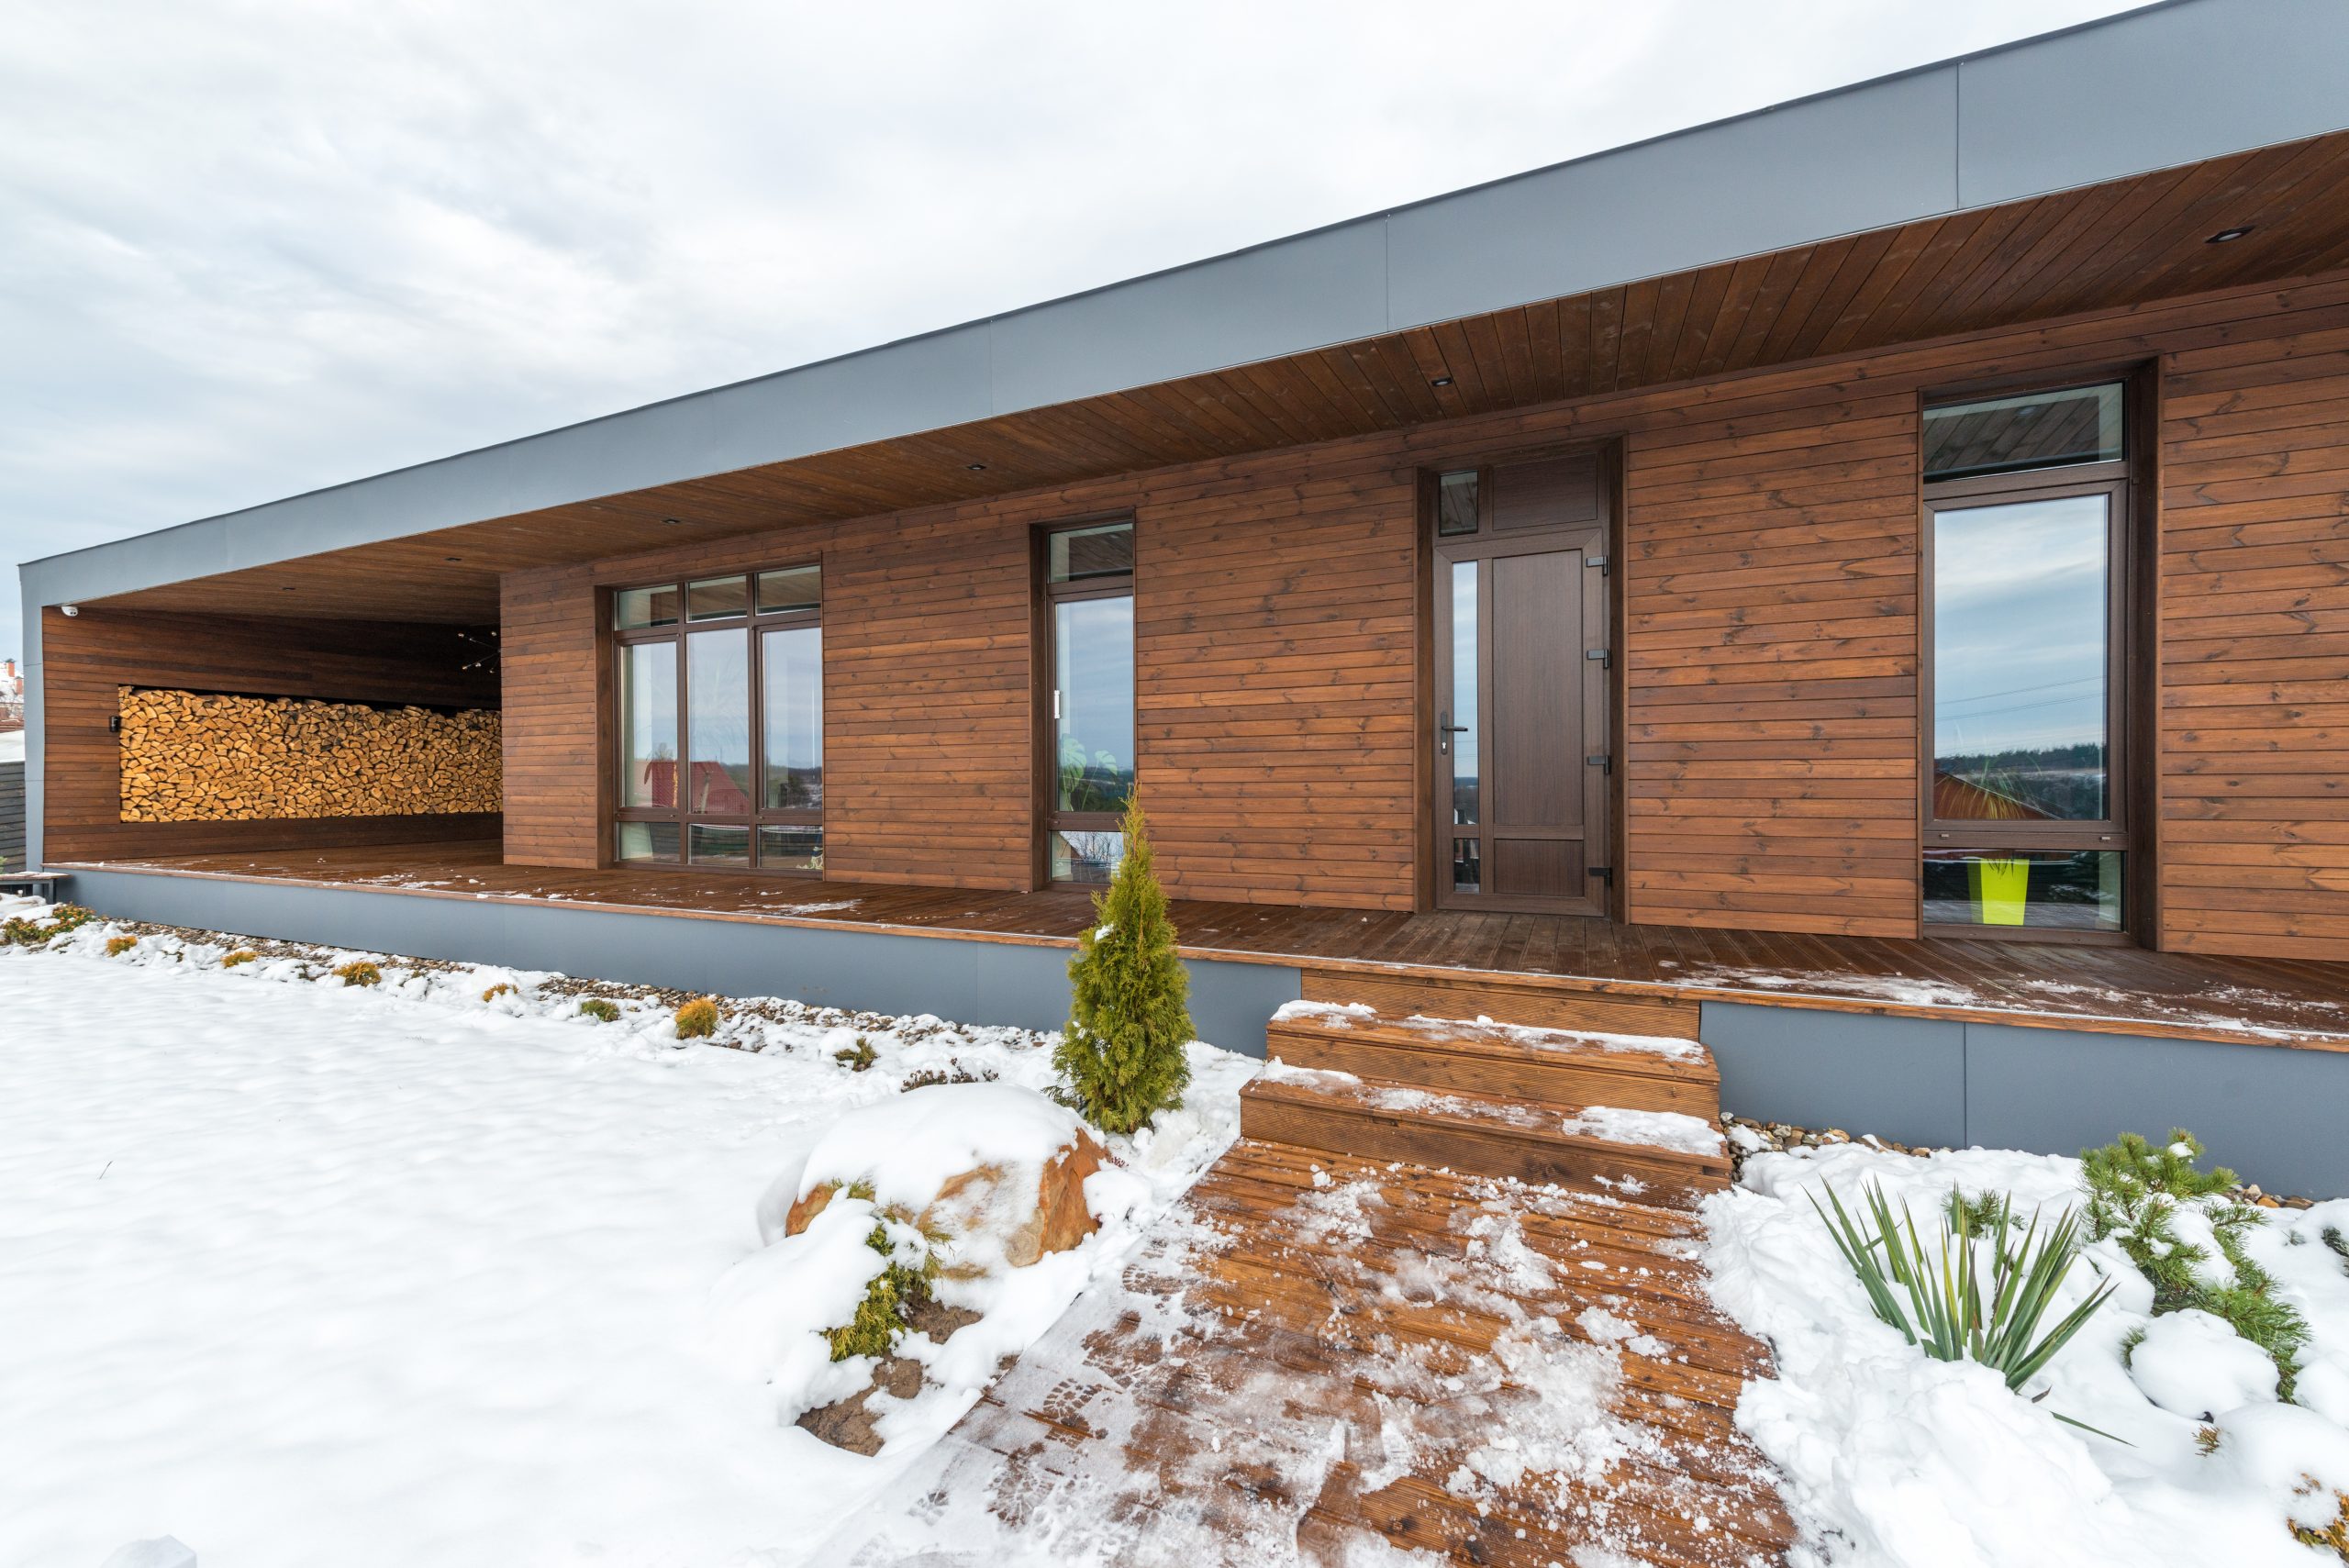 Photo of a modern wooden house